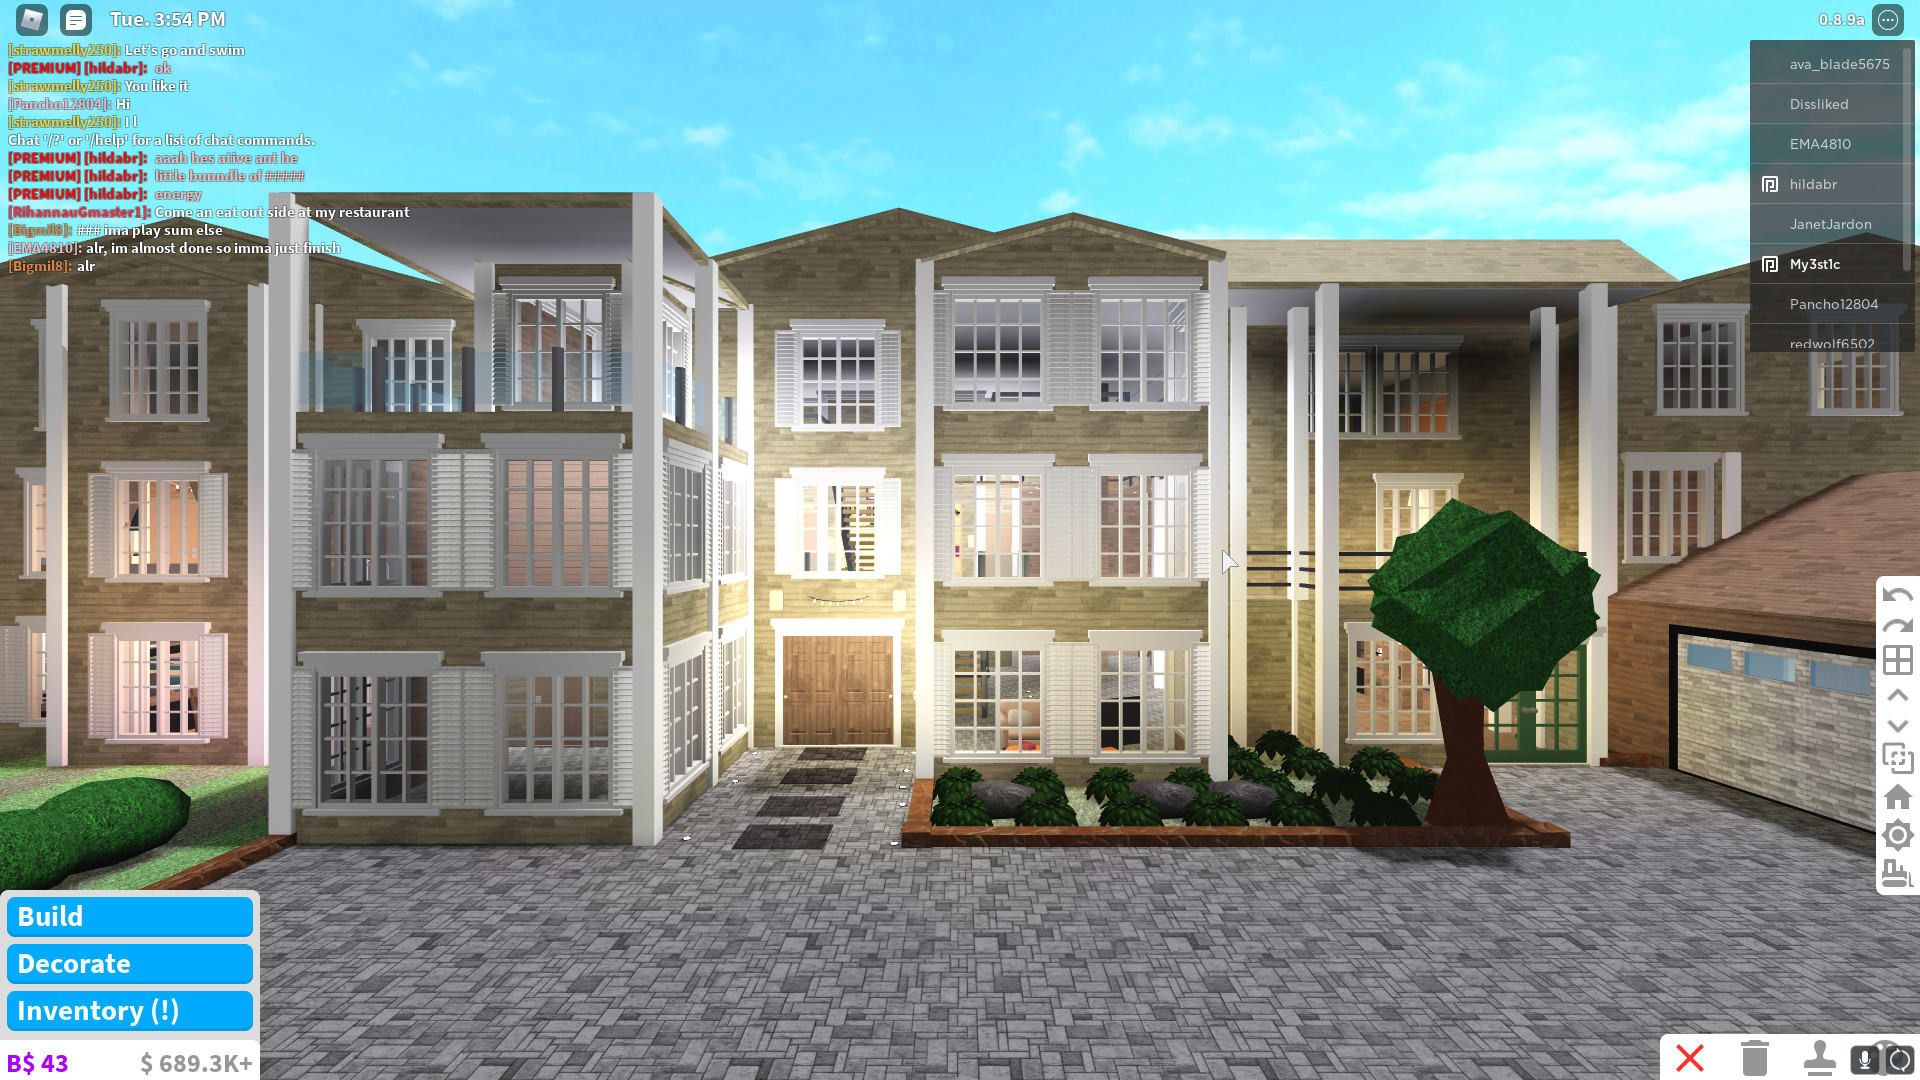 Build You A Dream House Or Mansion In Roblox Bloxburg By Omegawafrgaming - roblox houses under 20k family home bloxburg